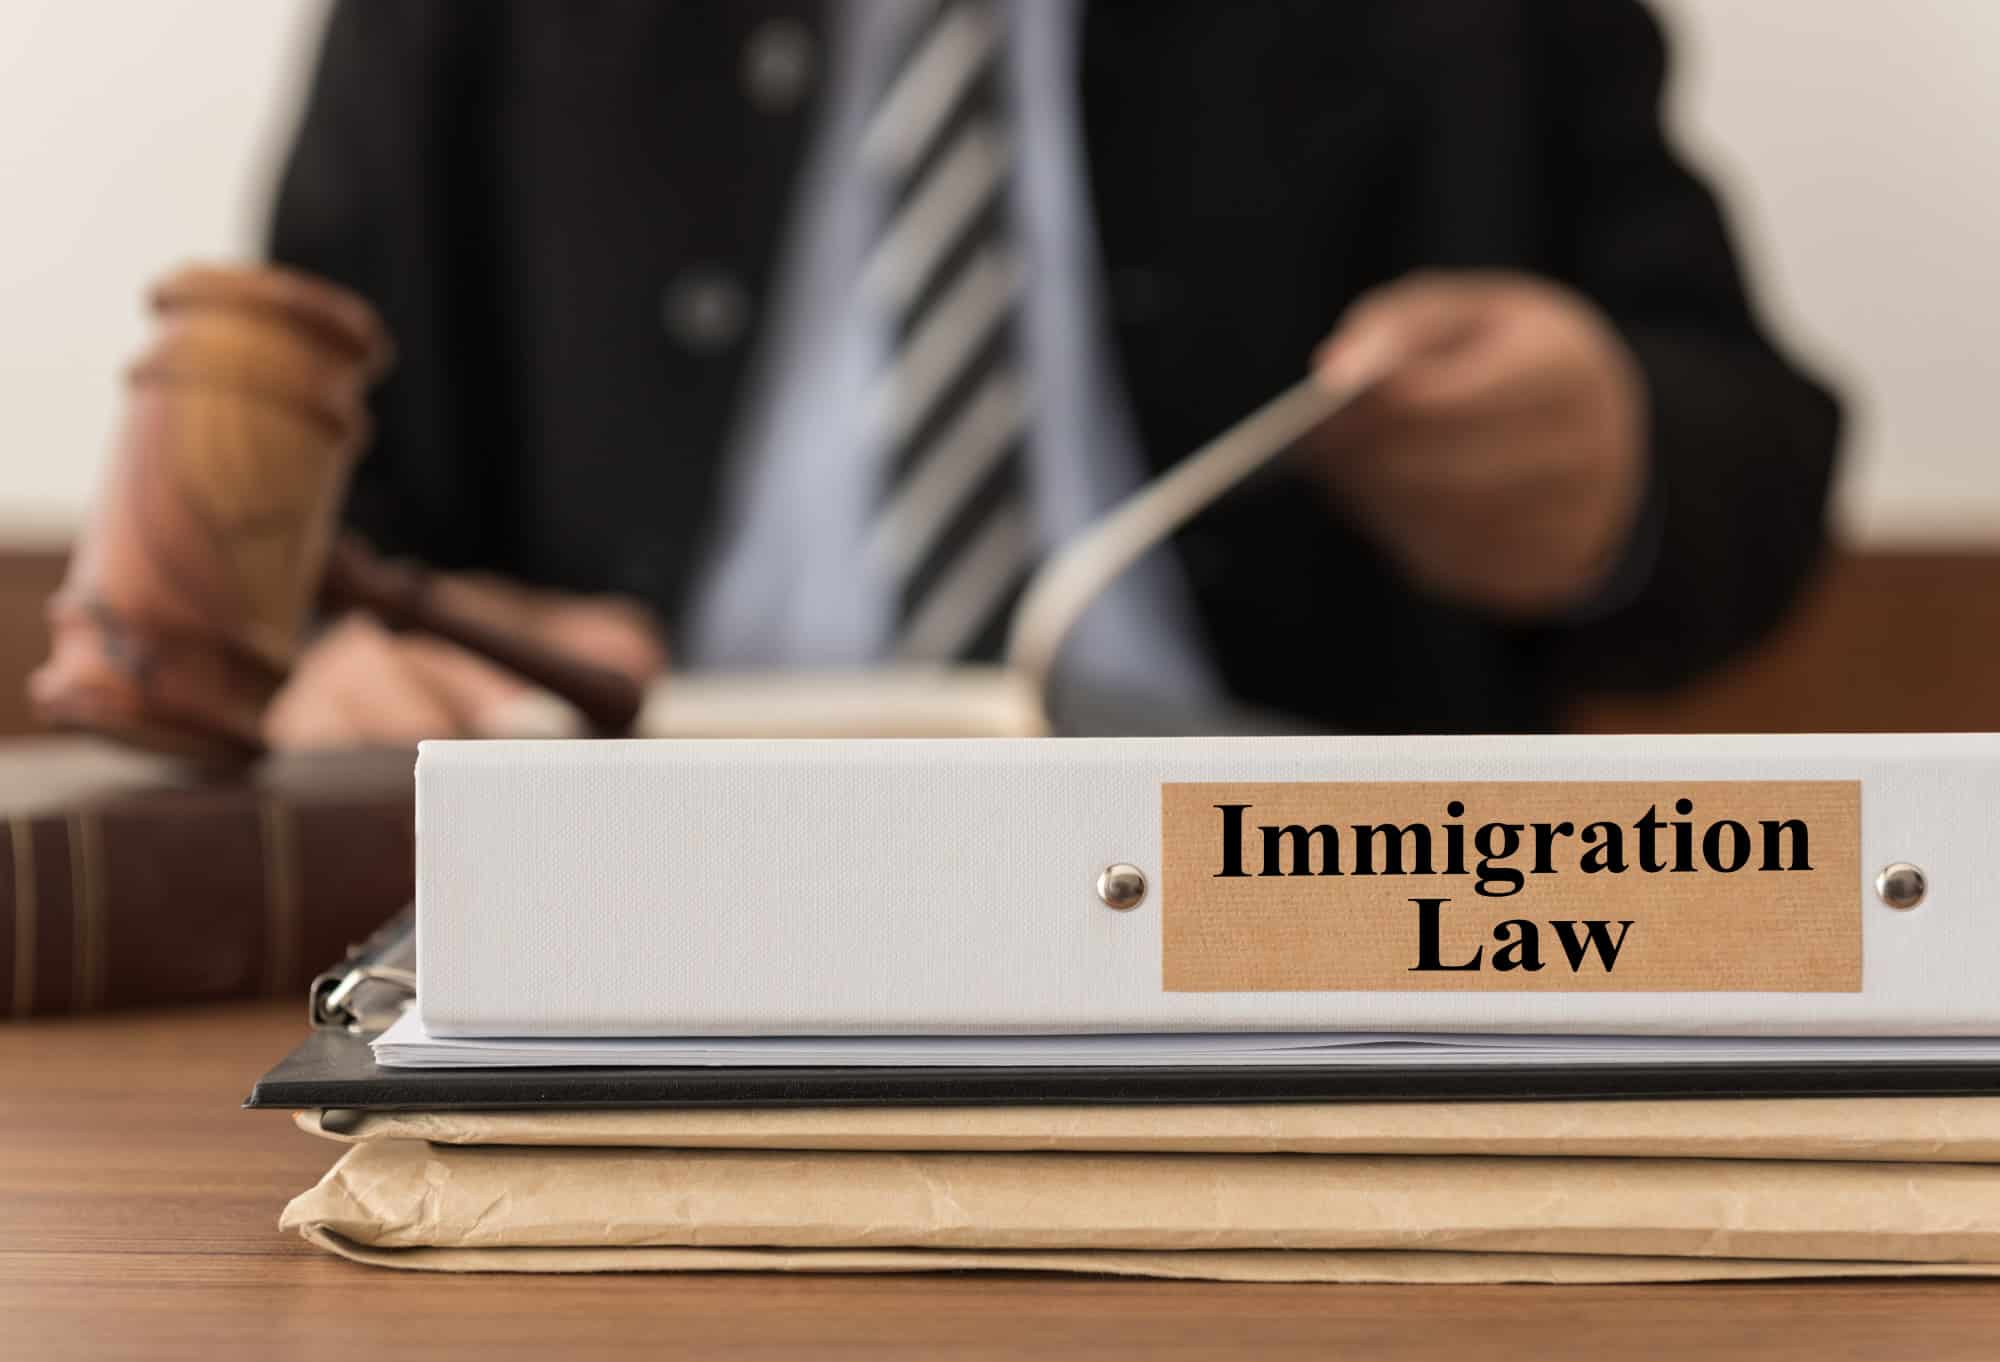 NYC immigration lawyer